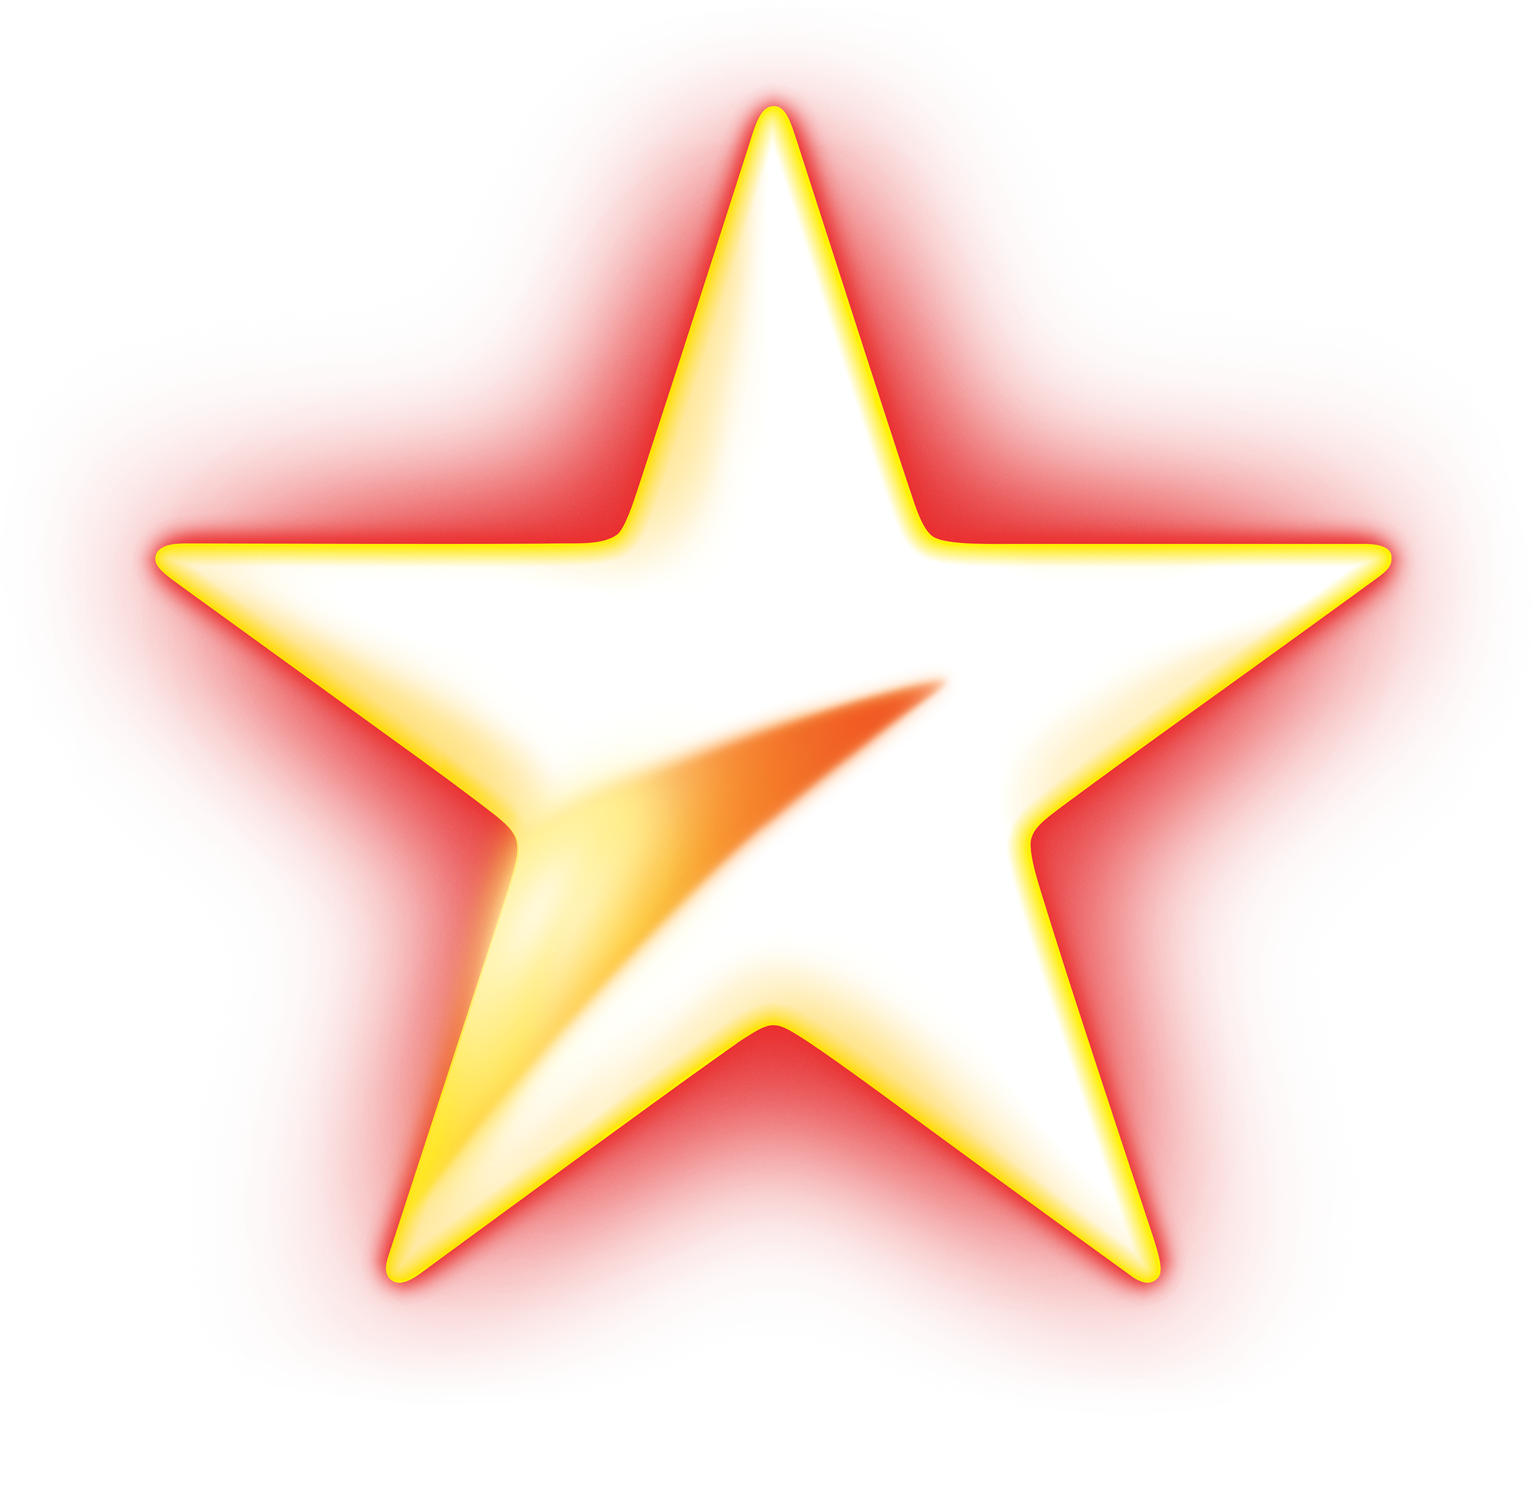 Download Got Talent Logo Star PNG Image with No Background - PNGkey.com